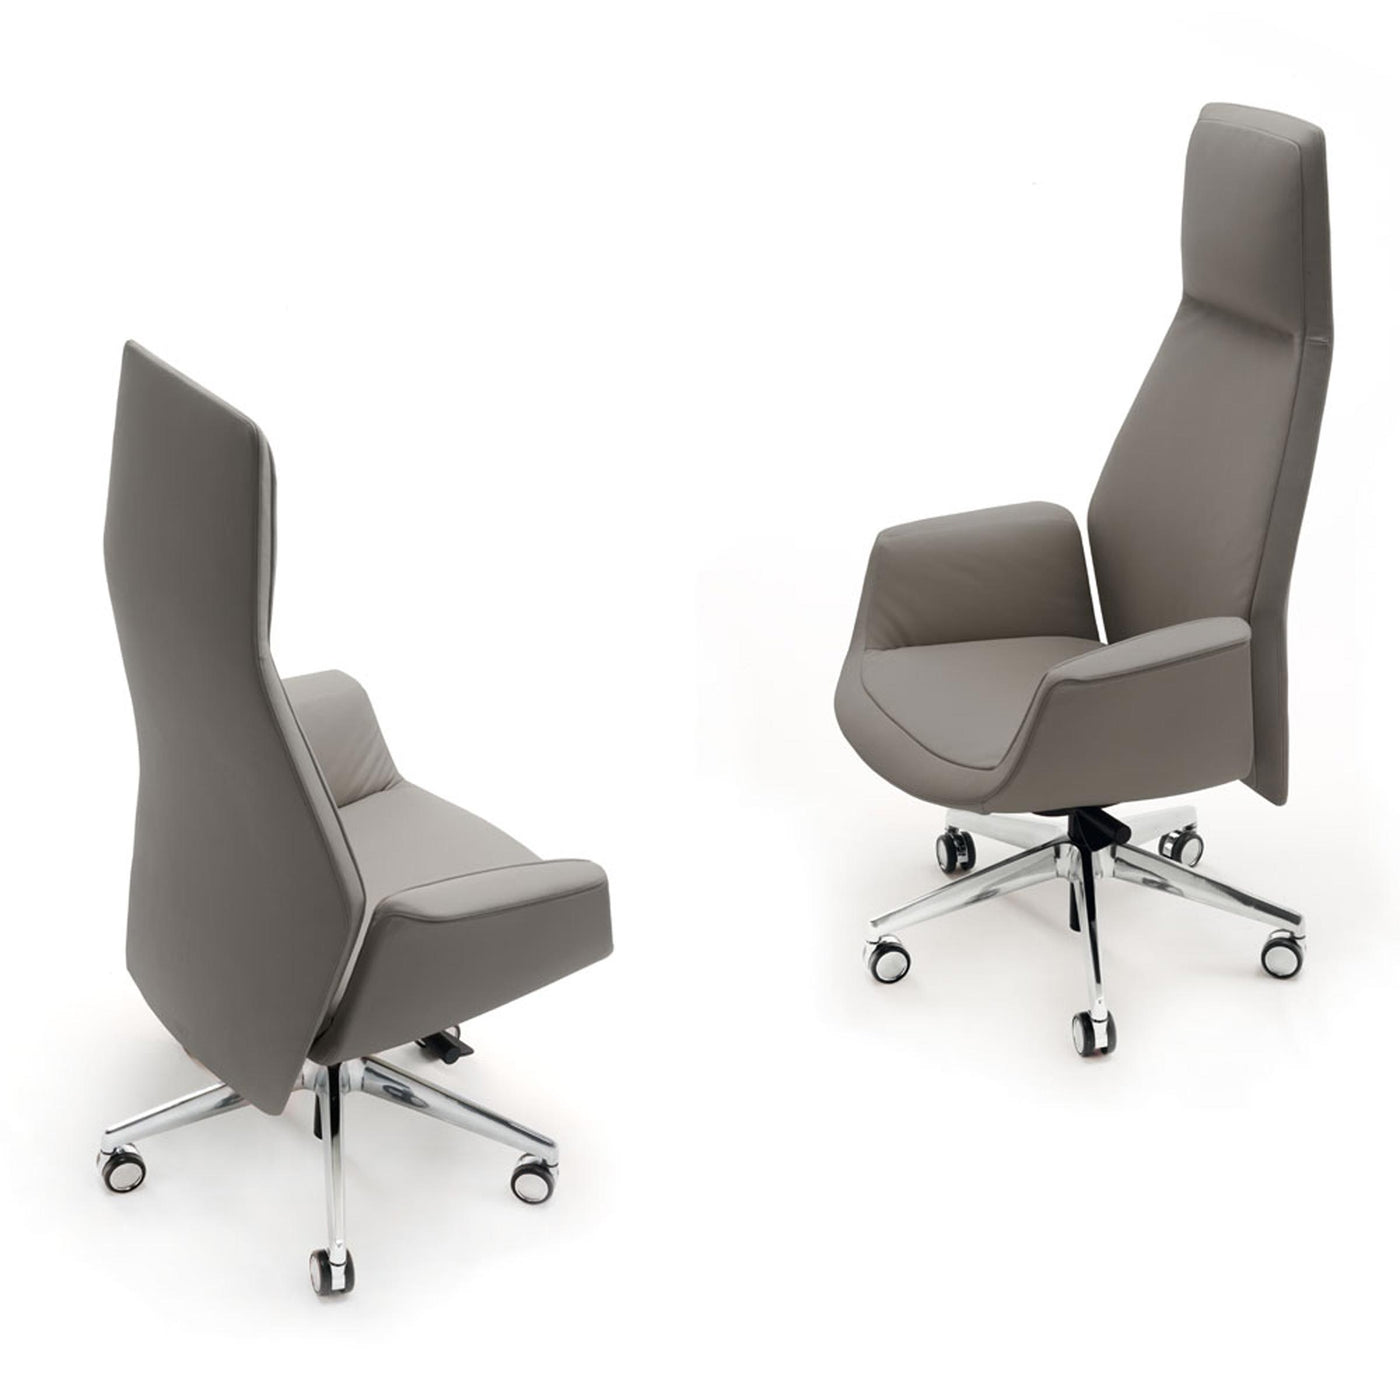 High Back Swivel Chair with Wheels DOWNTOWN PRESIDENT by Jean-Marie Massaud for Poltrona Frau 08